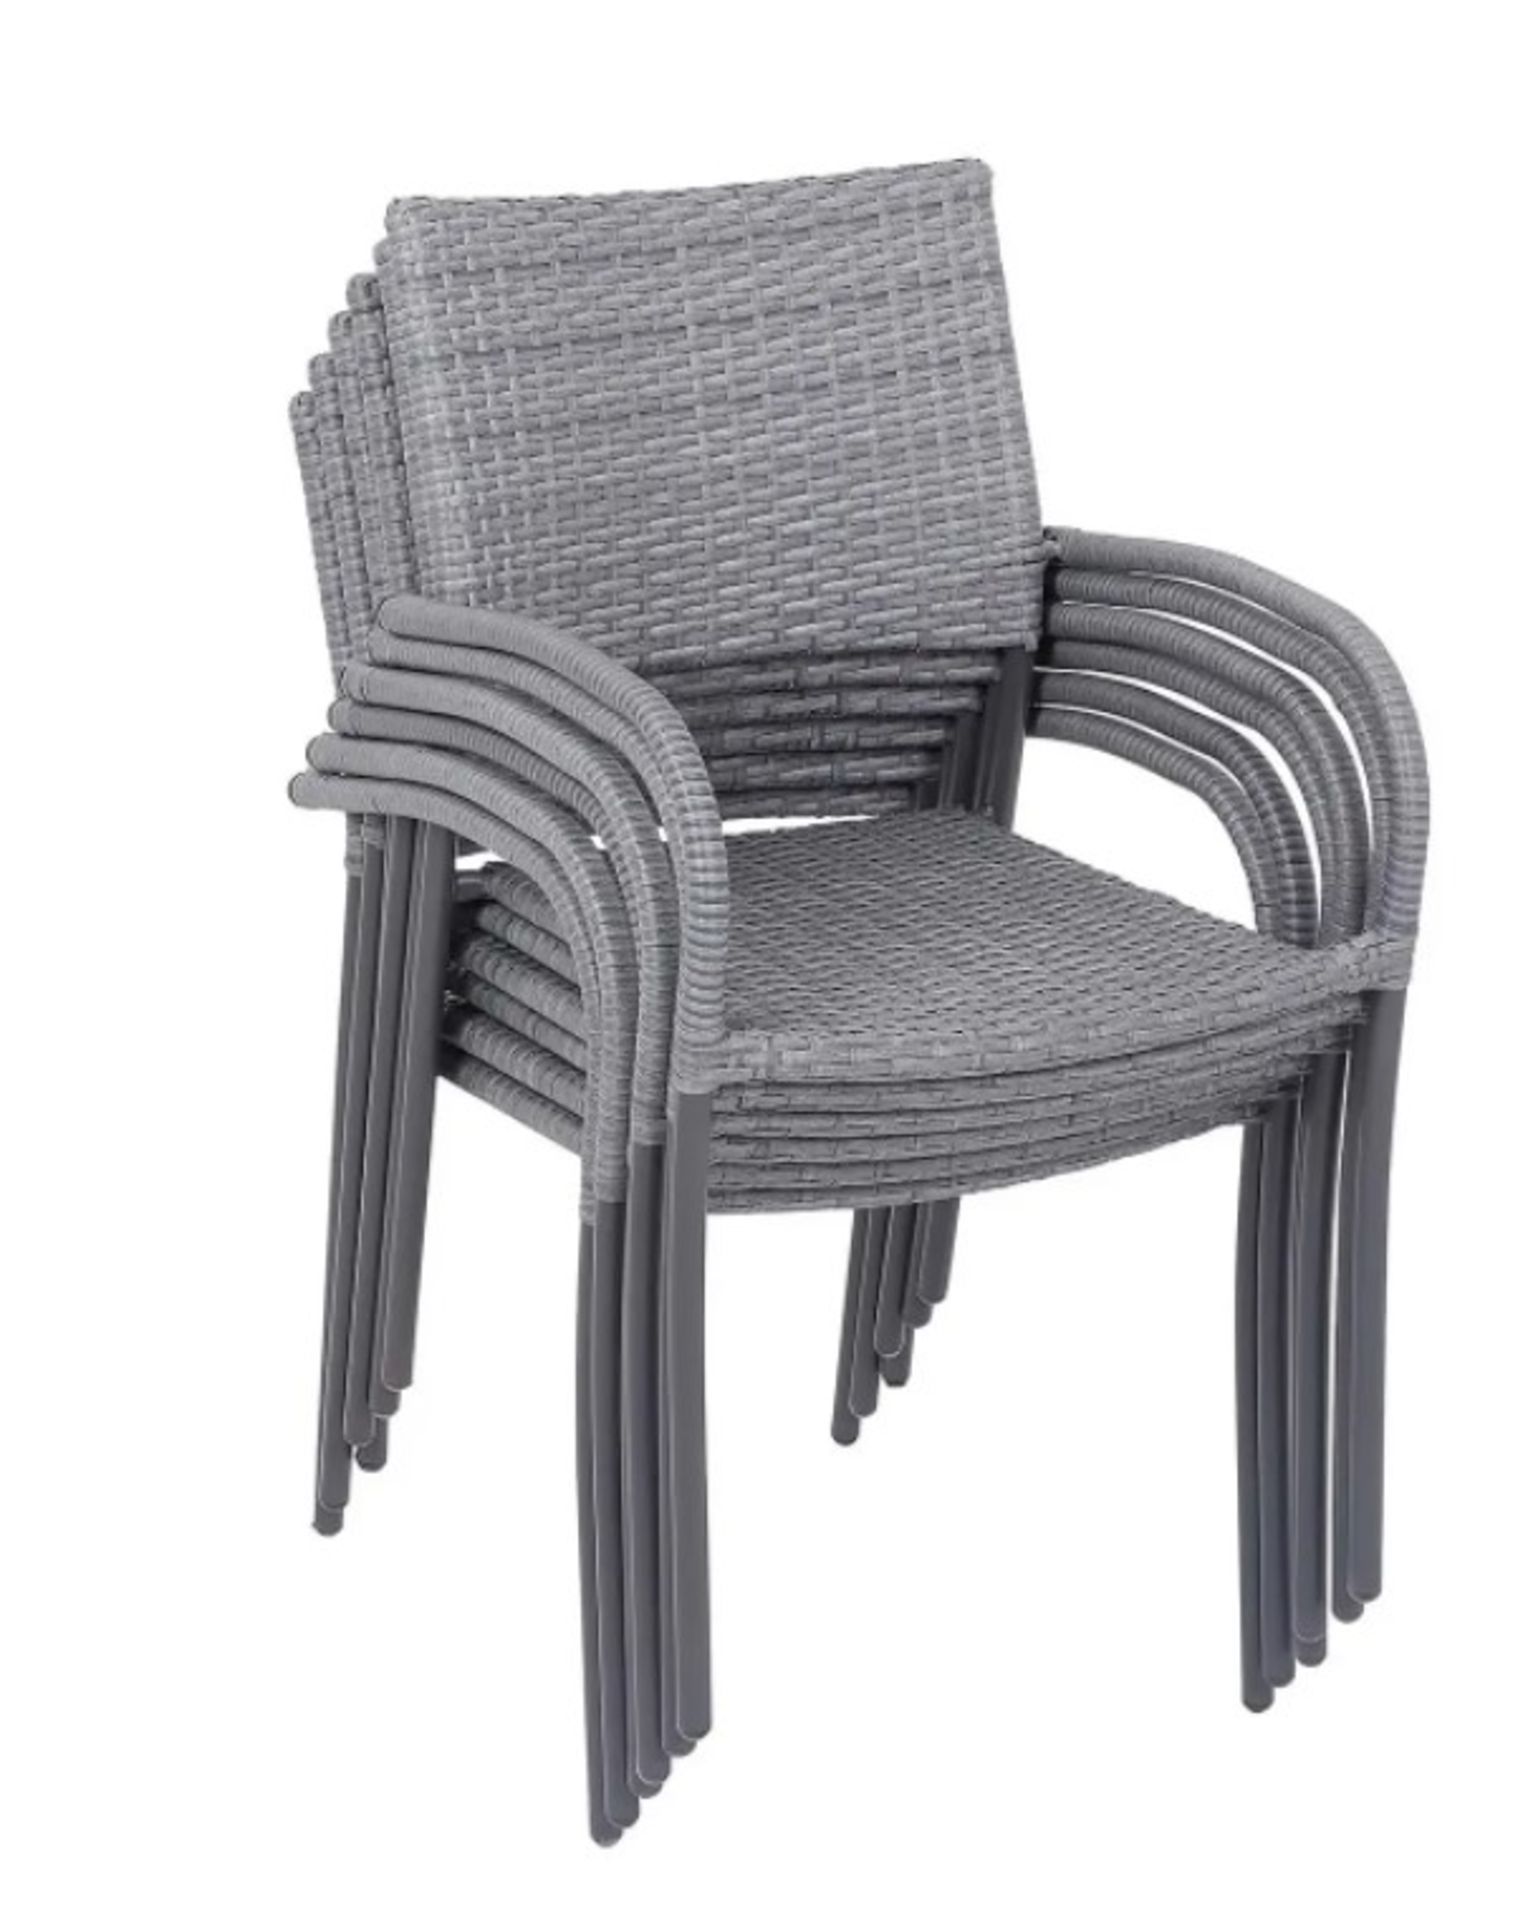 (59/5E) 7x Bambrick Stacking Chair Grey. (All Units Appears As New). - Image 2 of 4